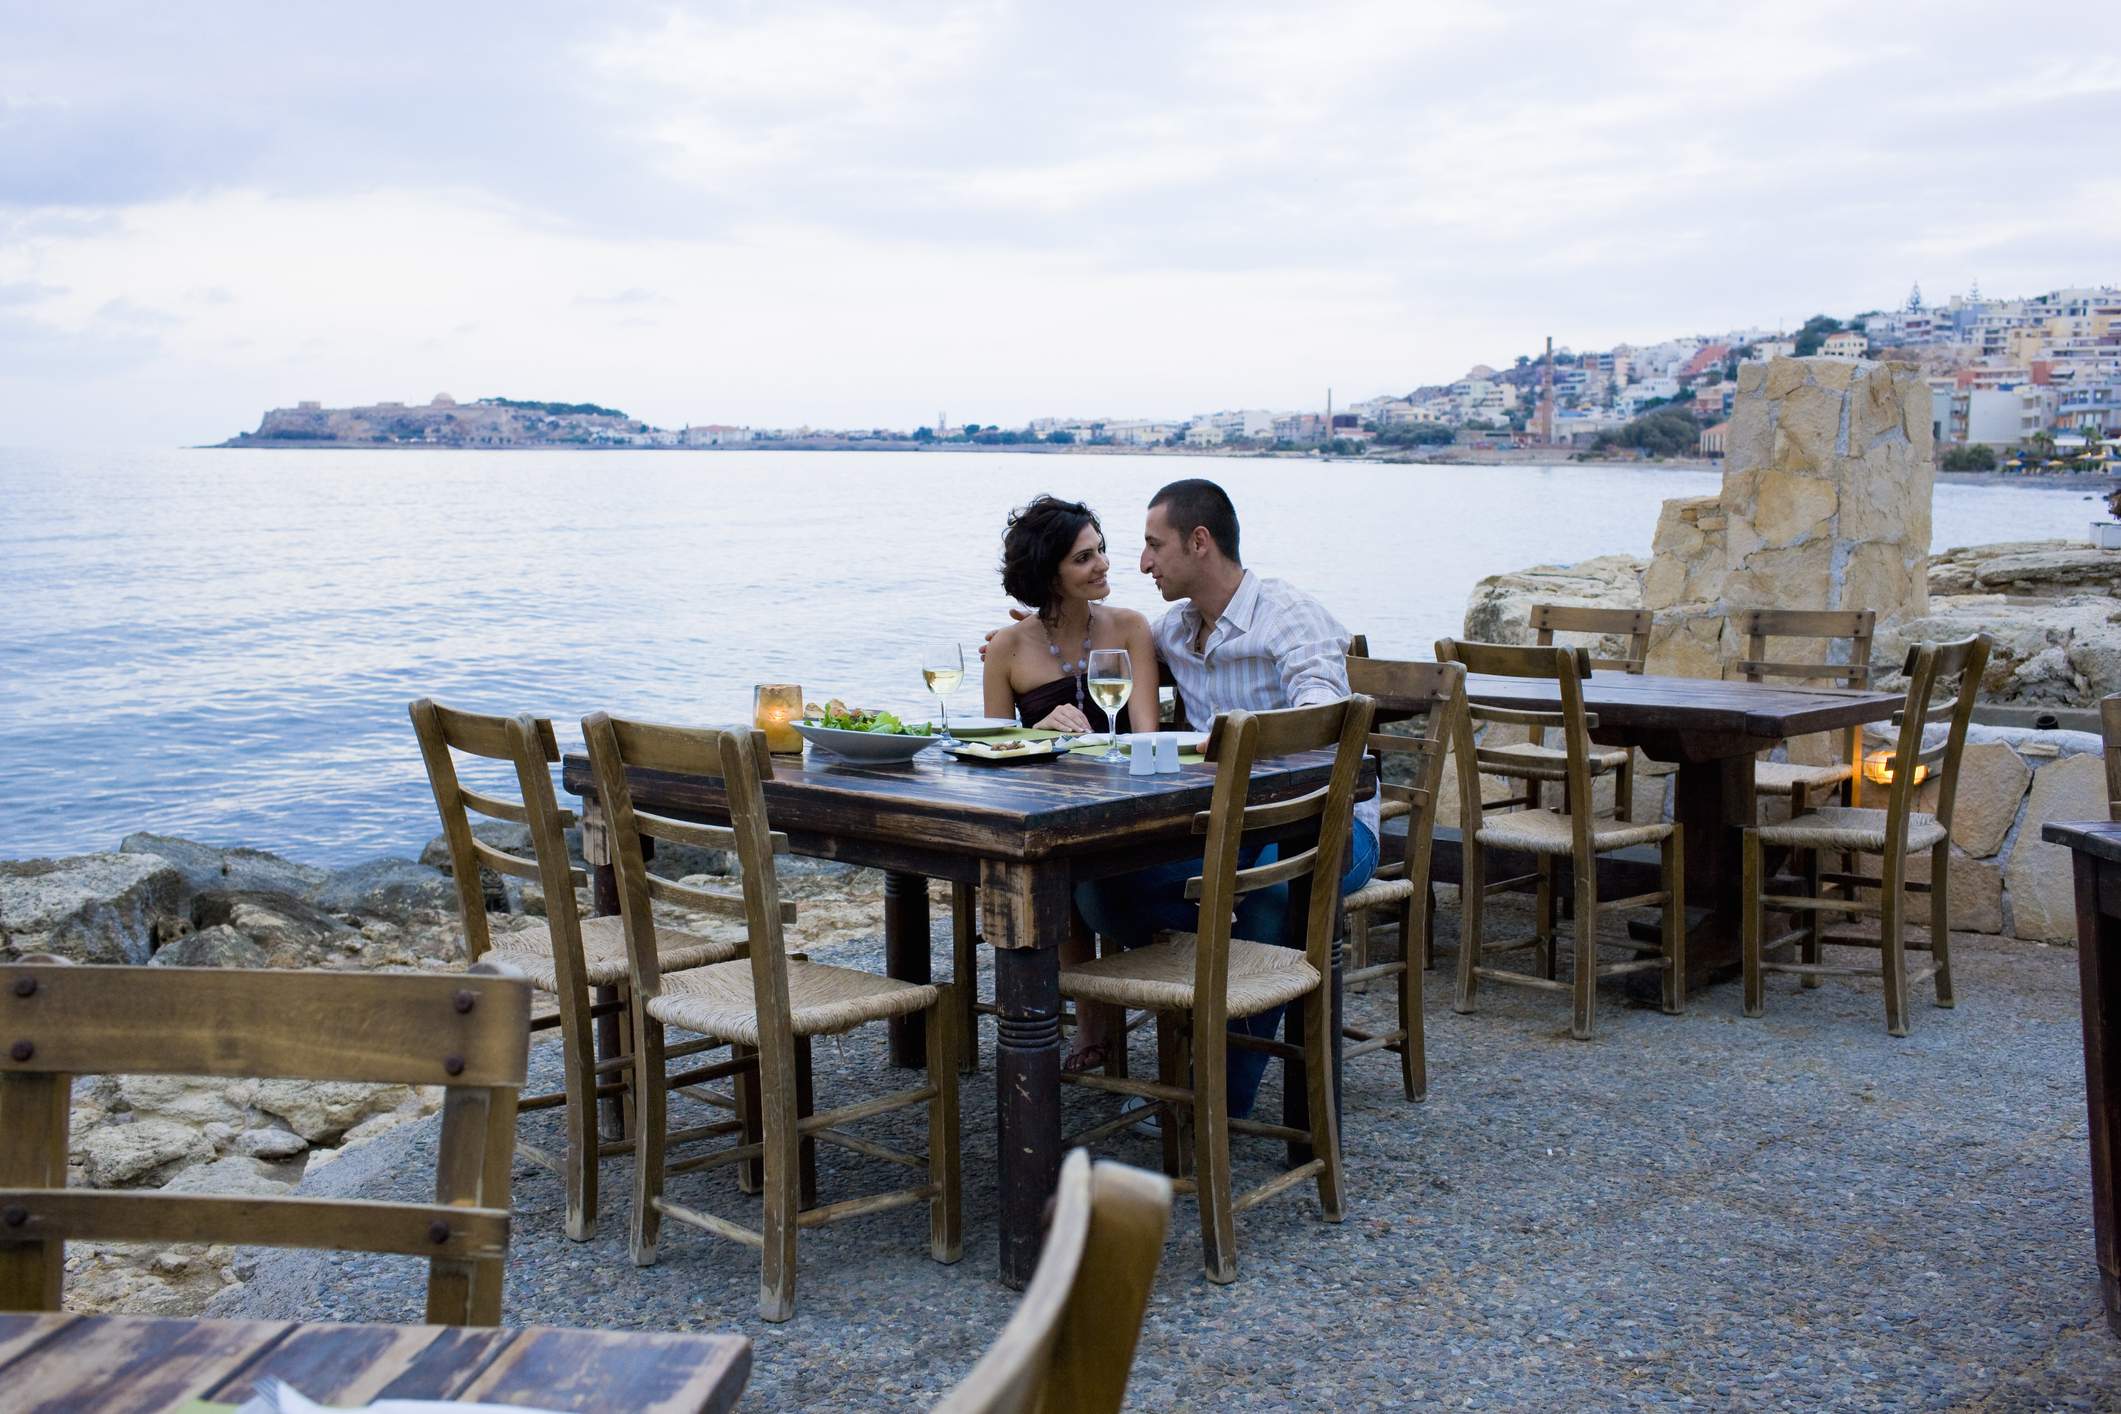 Image depicts a couple sitting at a restaurant table outside near the water.